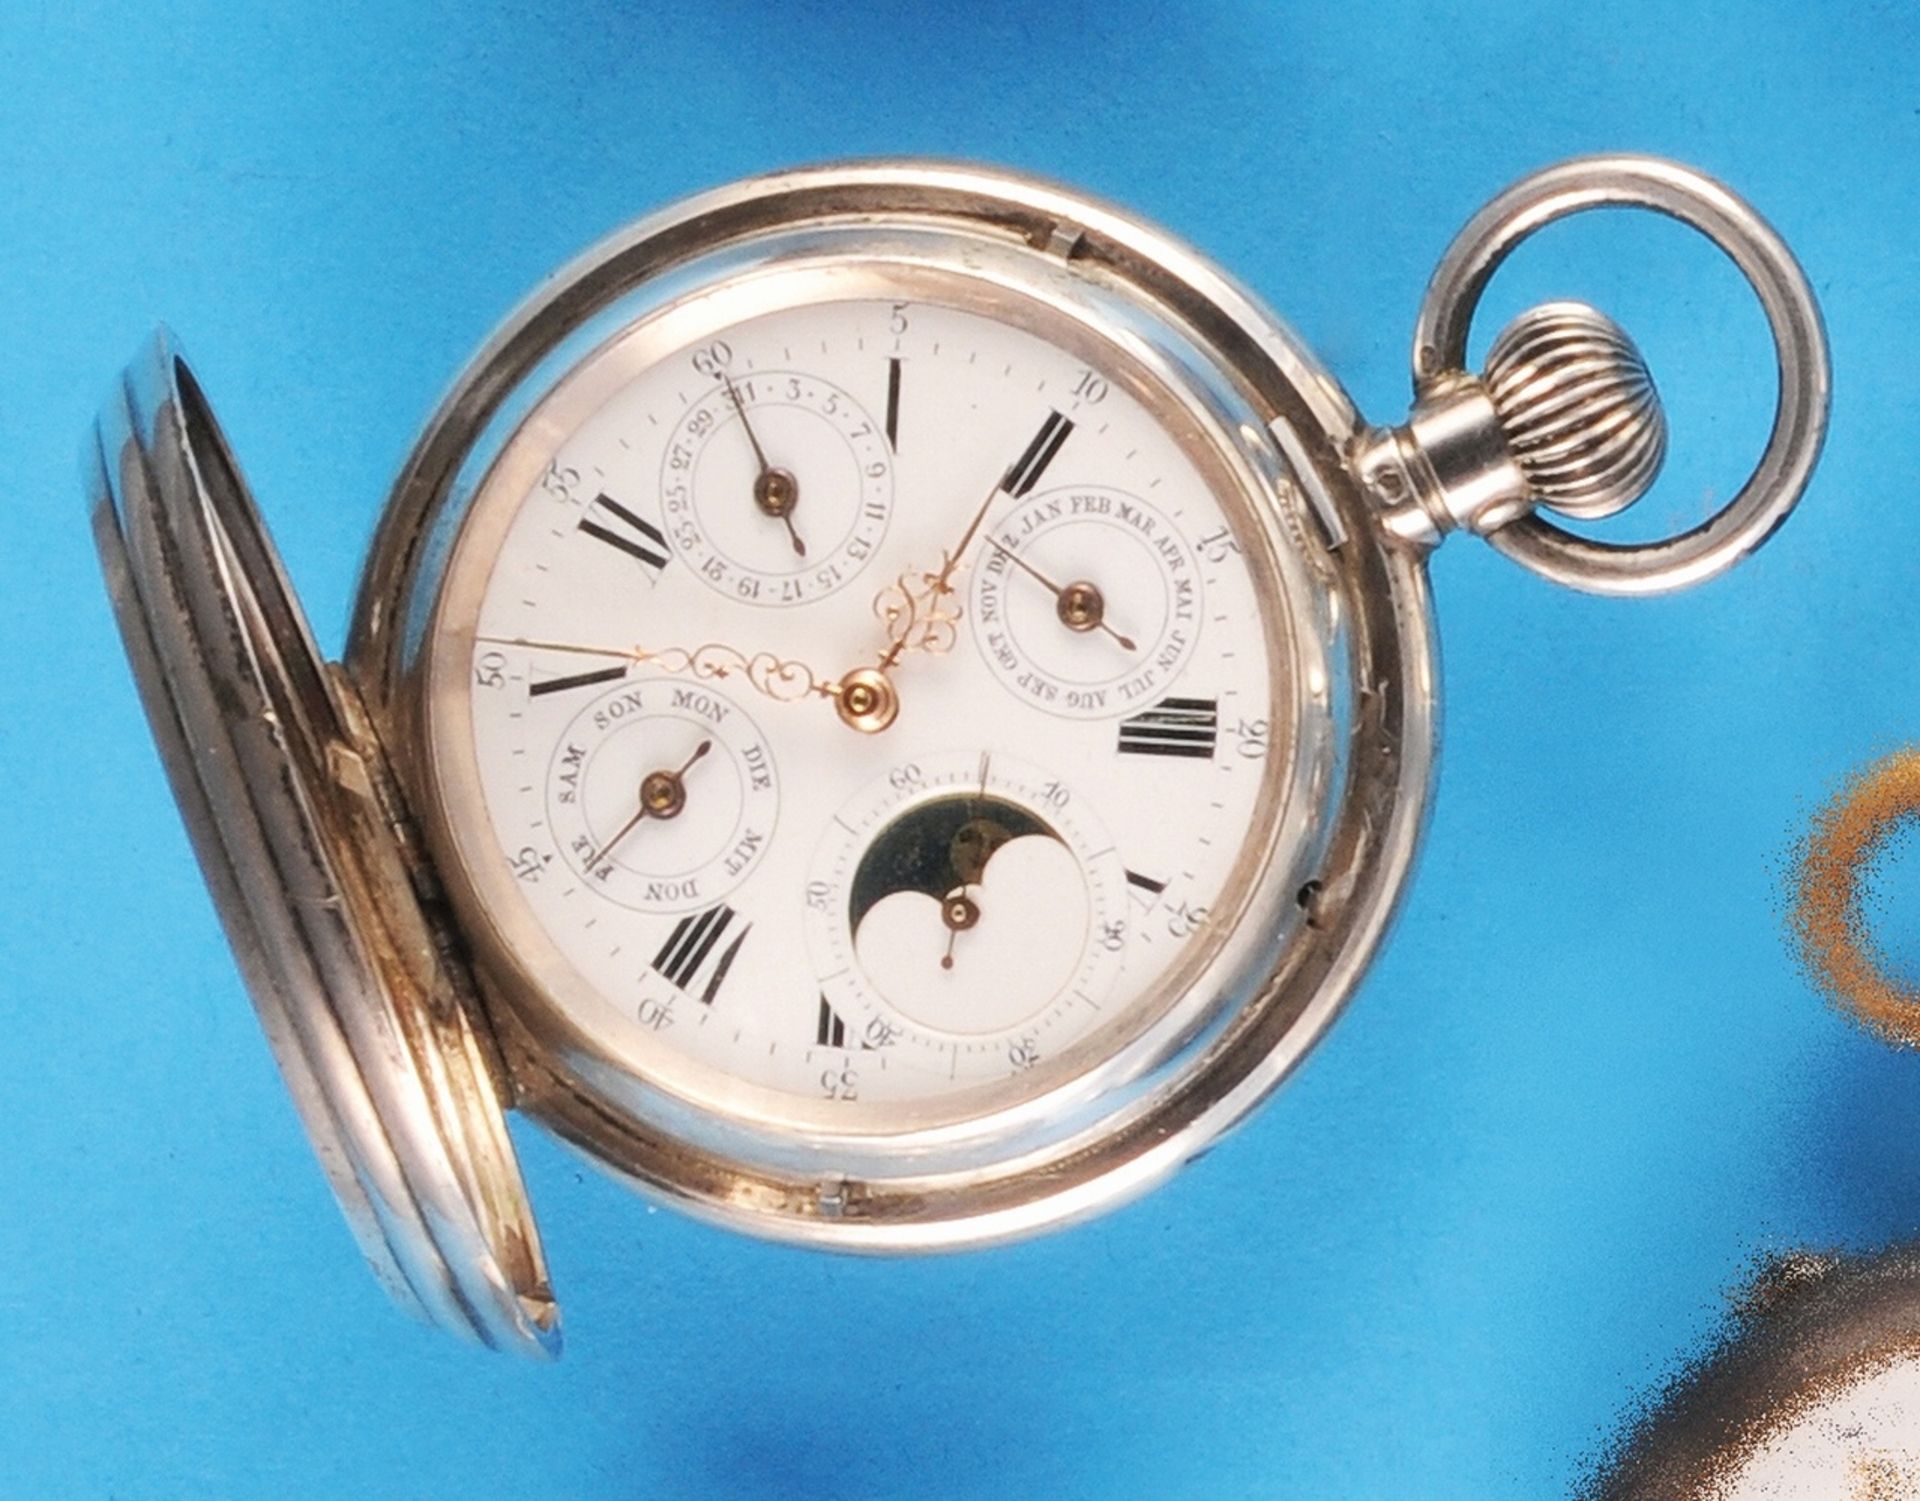 Silver pocket watch with sprung cover and moon phase calendar, case engraved with